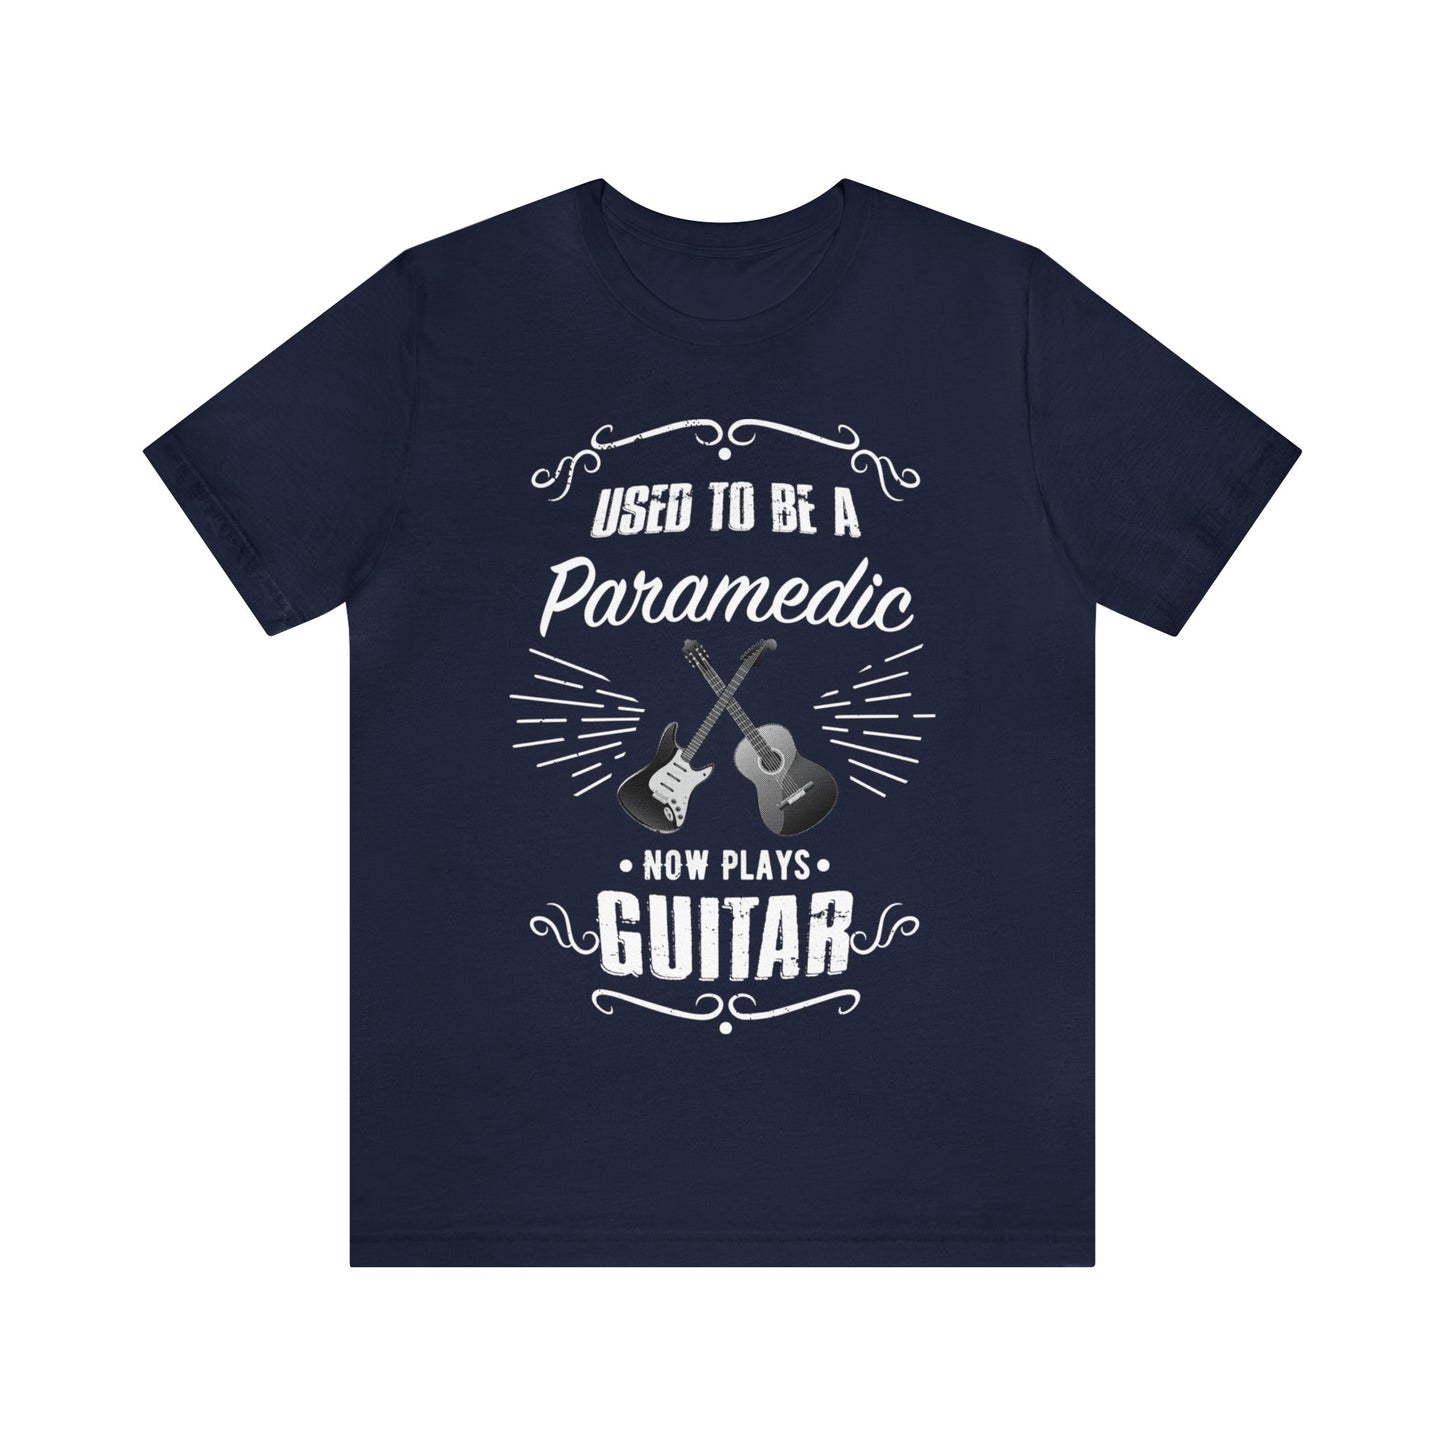 Used to be a PARAMEDIC; Now Plays GUITAR - Funny Retirement Gift, Unisex T-shirt Bella+Canvas 3001, dark shirt colors for amateur musician/guitar player